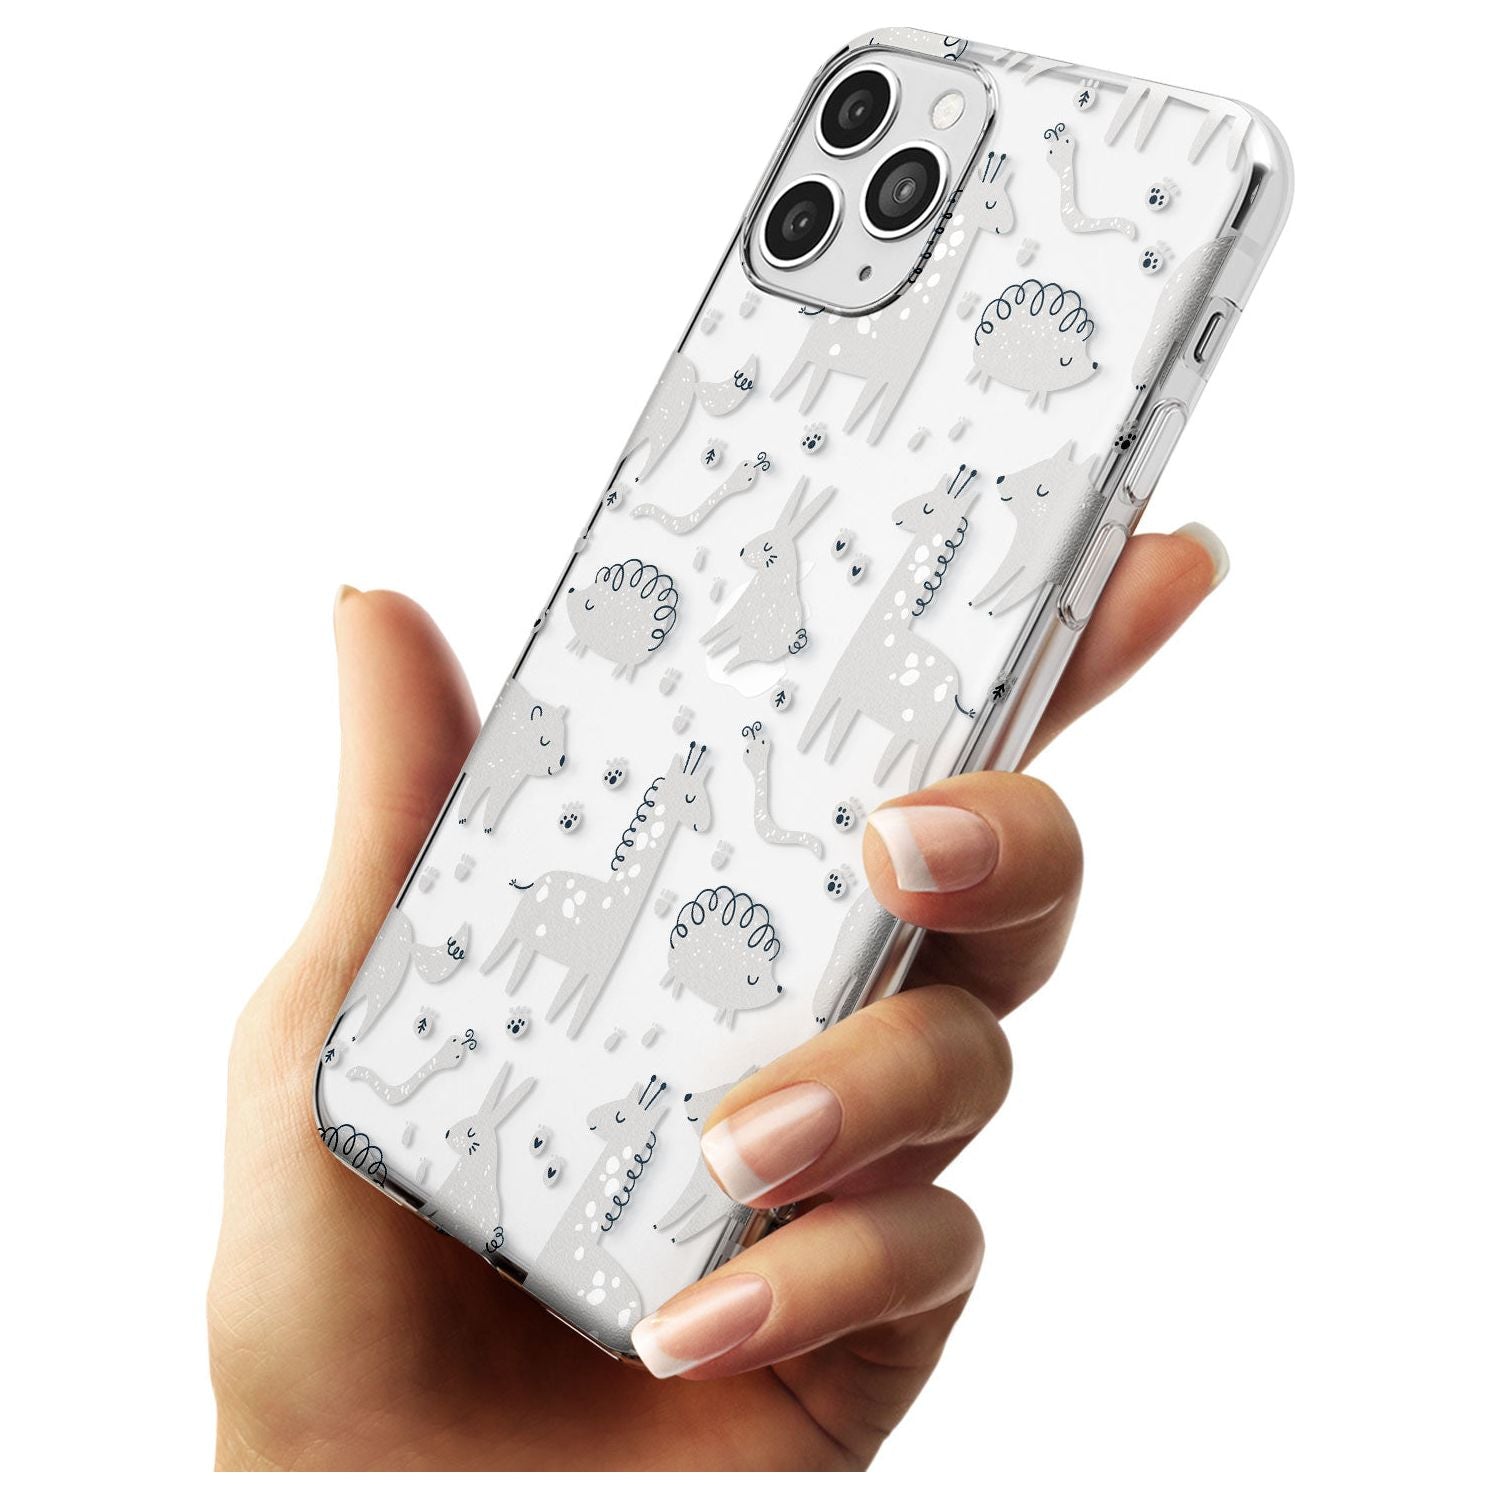 Adorable Mixed Animals Pattern (Clear) Slim TPU Phone Case for iPhone 11 Pro Max